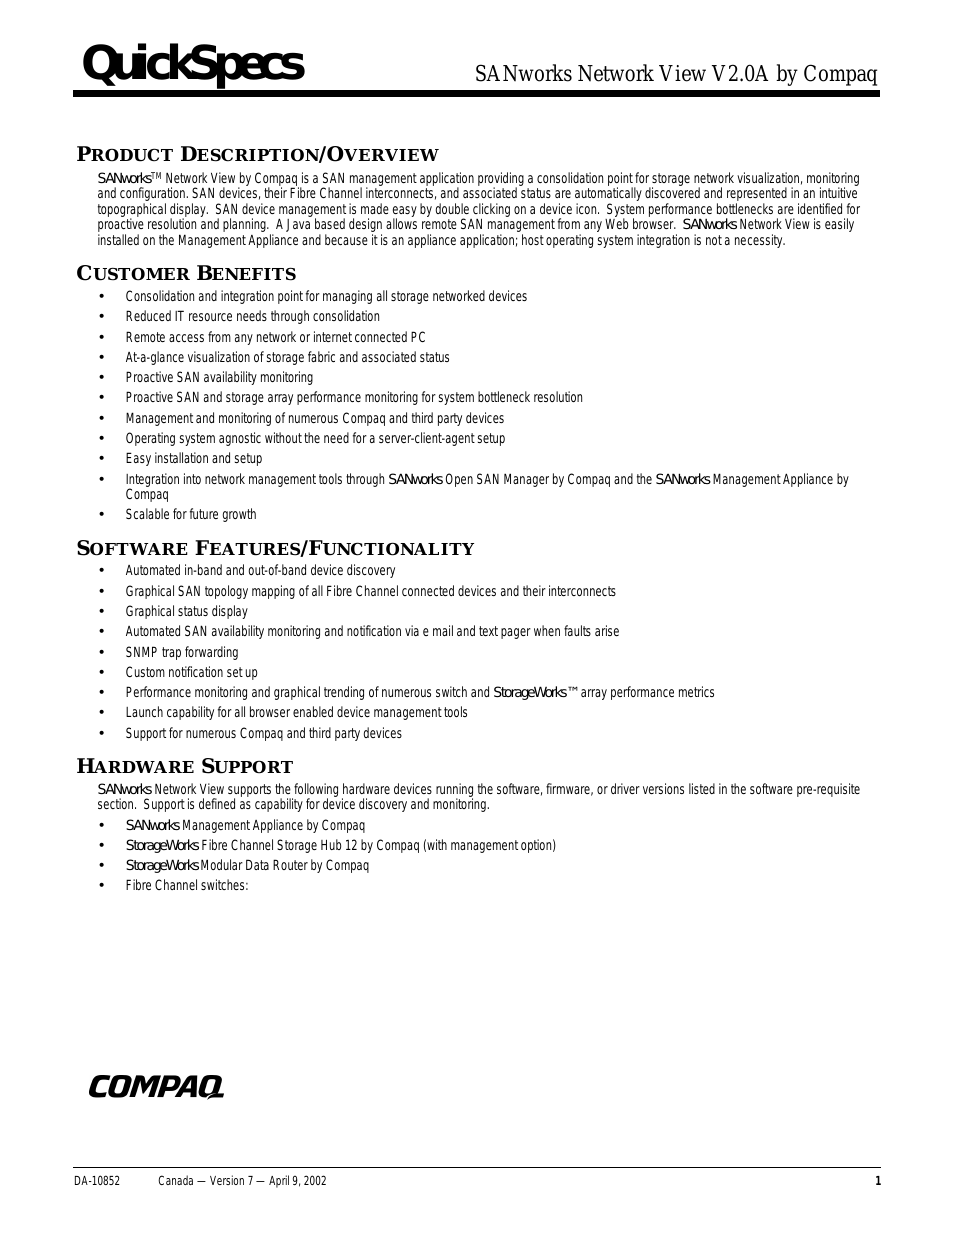 SANetworks Network View DA10682 (Page 1)